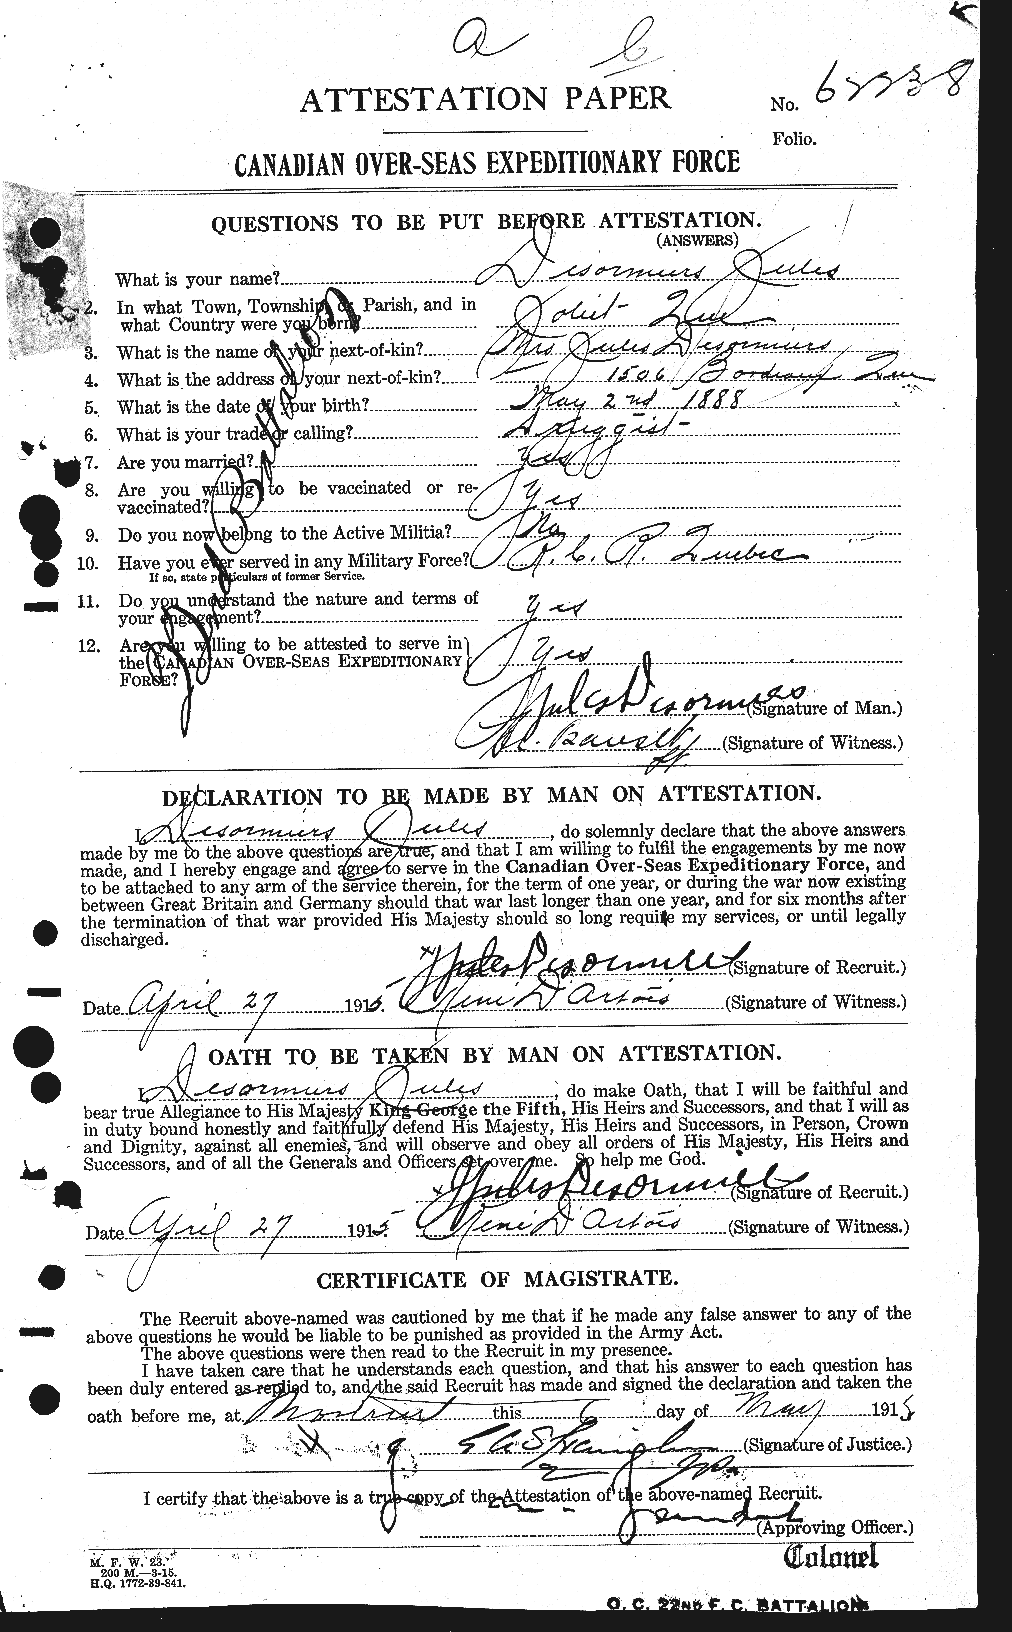 Personnel Records of the First World War - CEF 291450a